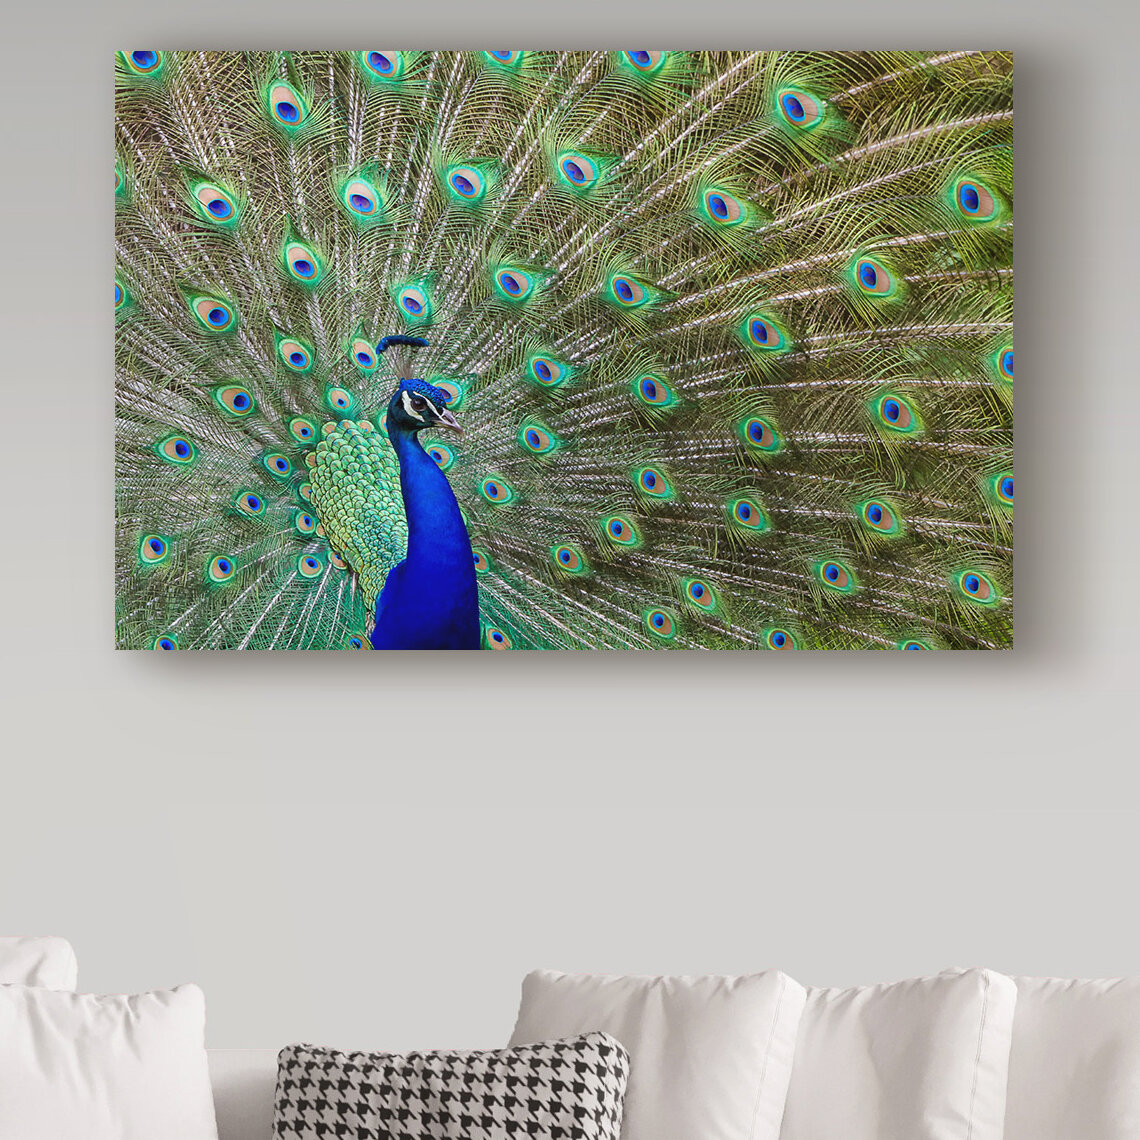 Peacock Feather | Large Solid-Faced Canvas Wall Art Print | Great Big Canvas